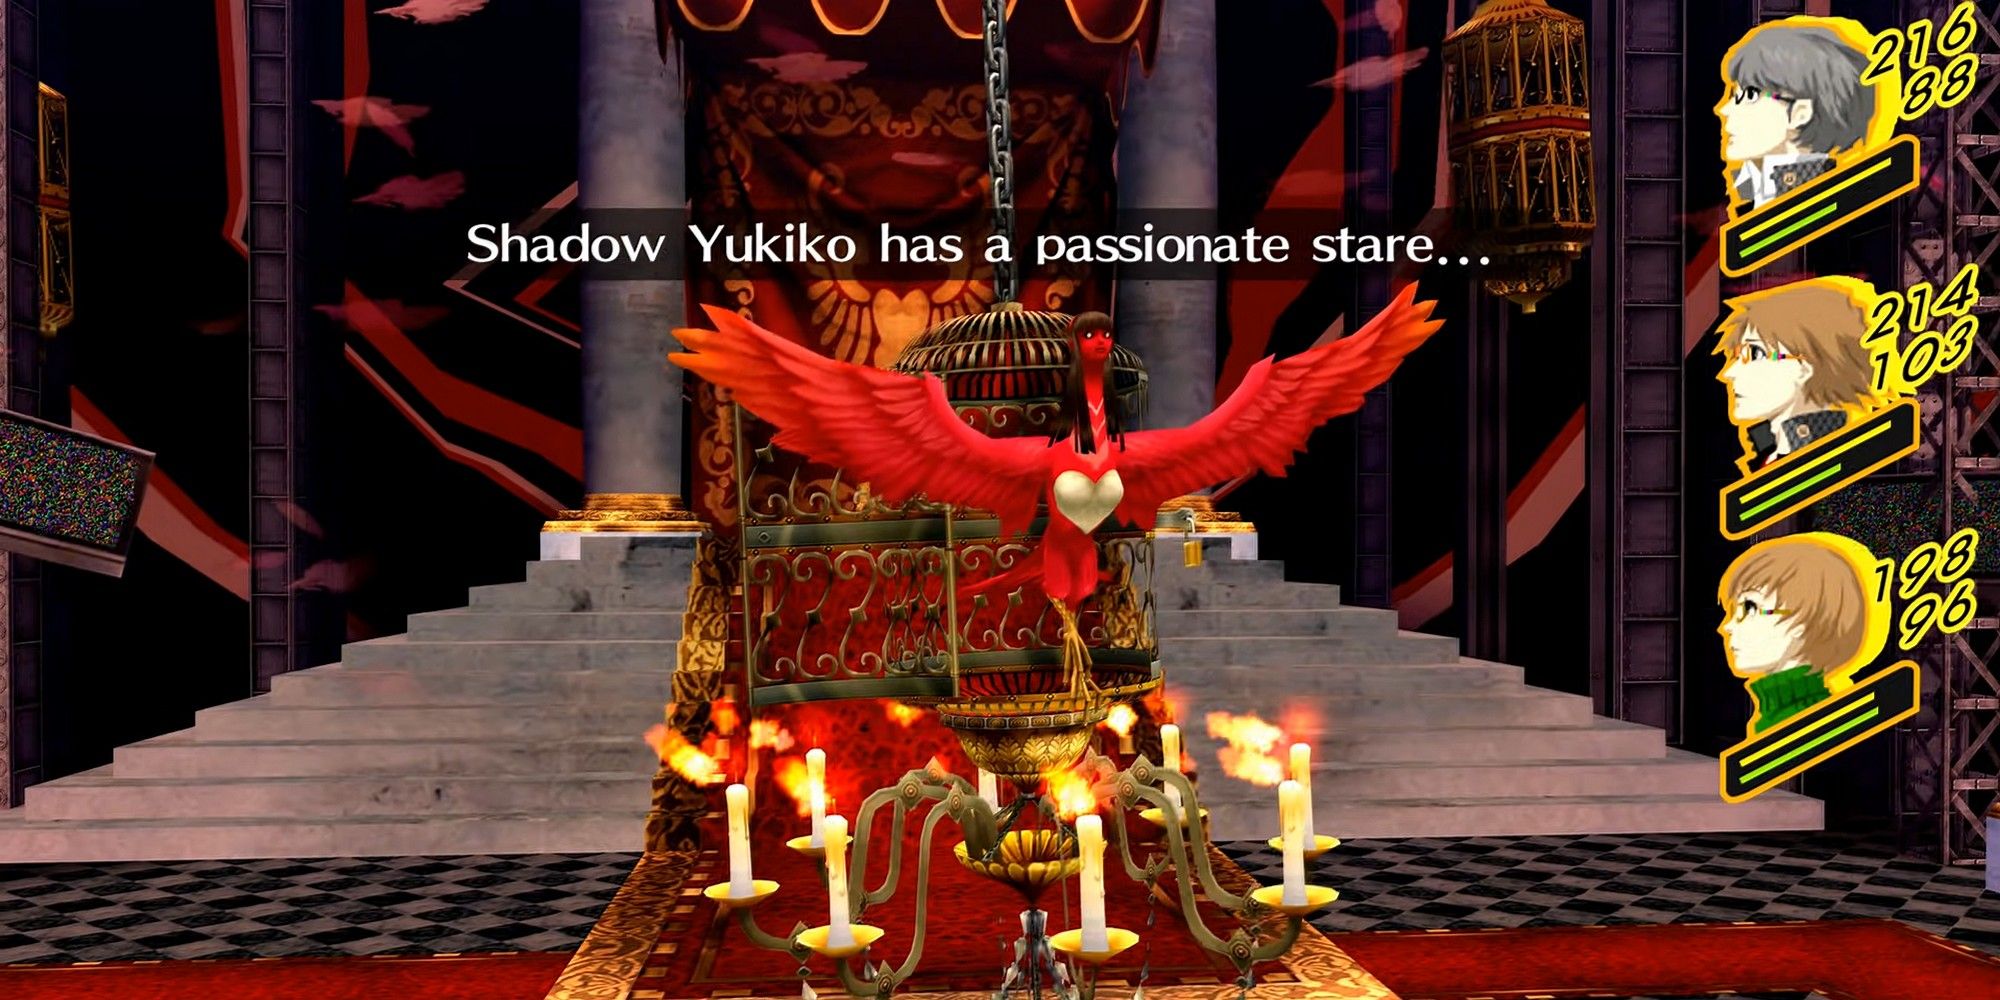 shadow yukiko about to unleash her big fire attack, the trigger to guard chie in persona 4 golden